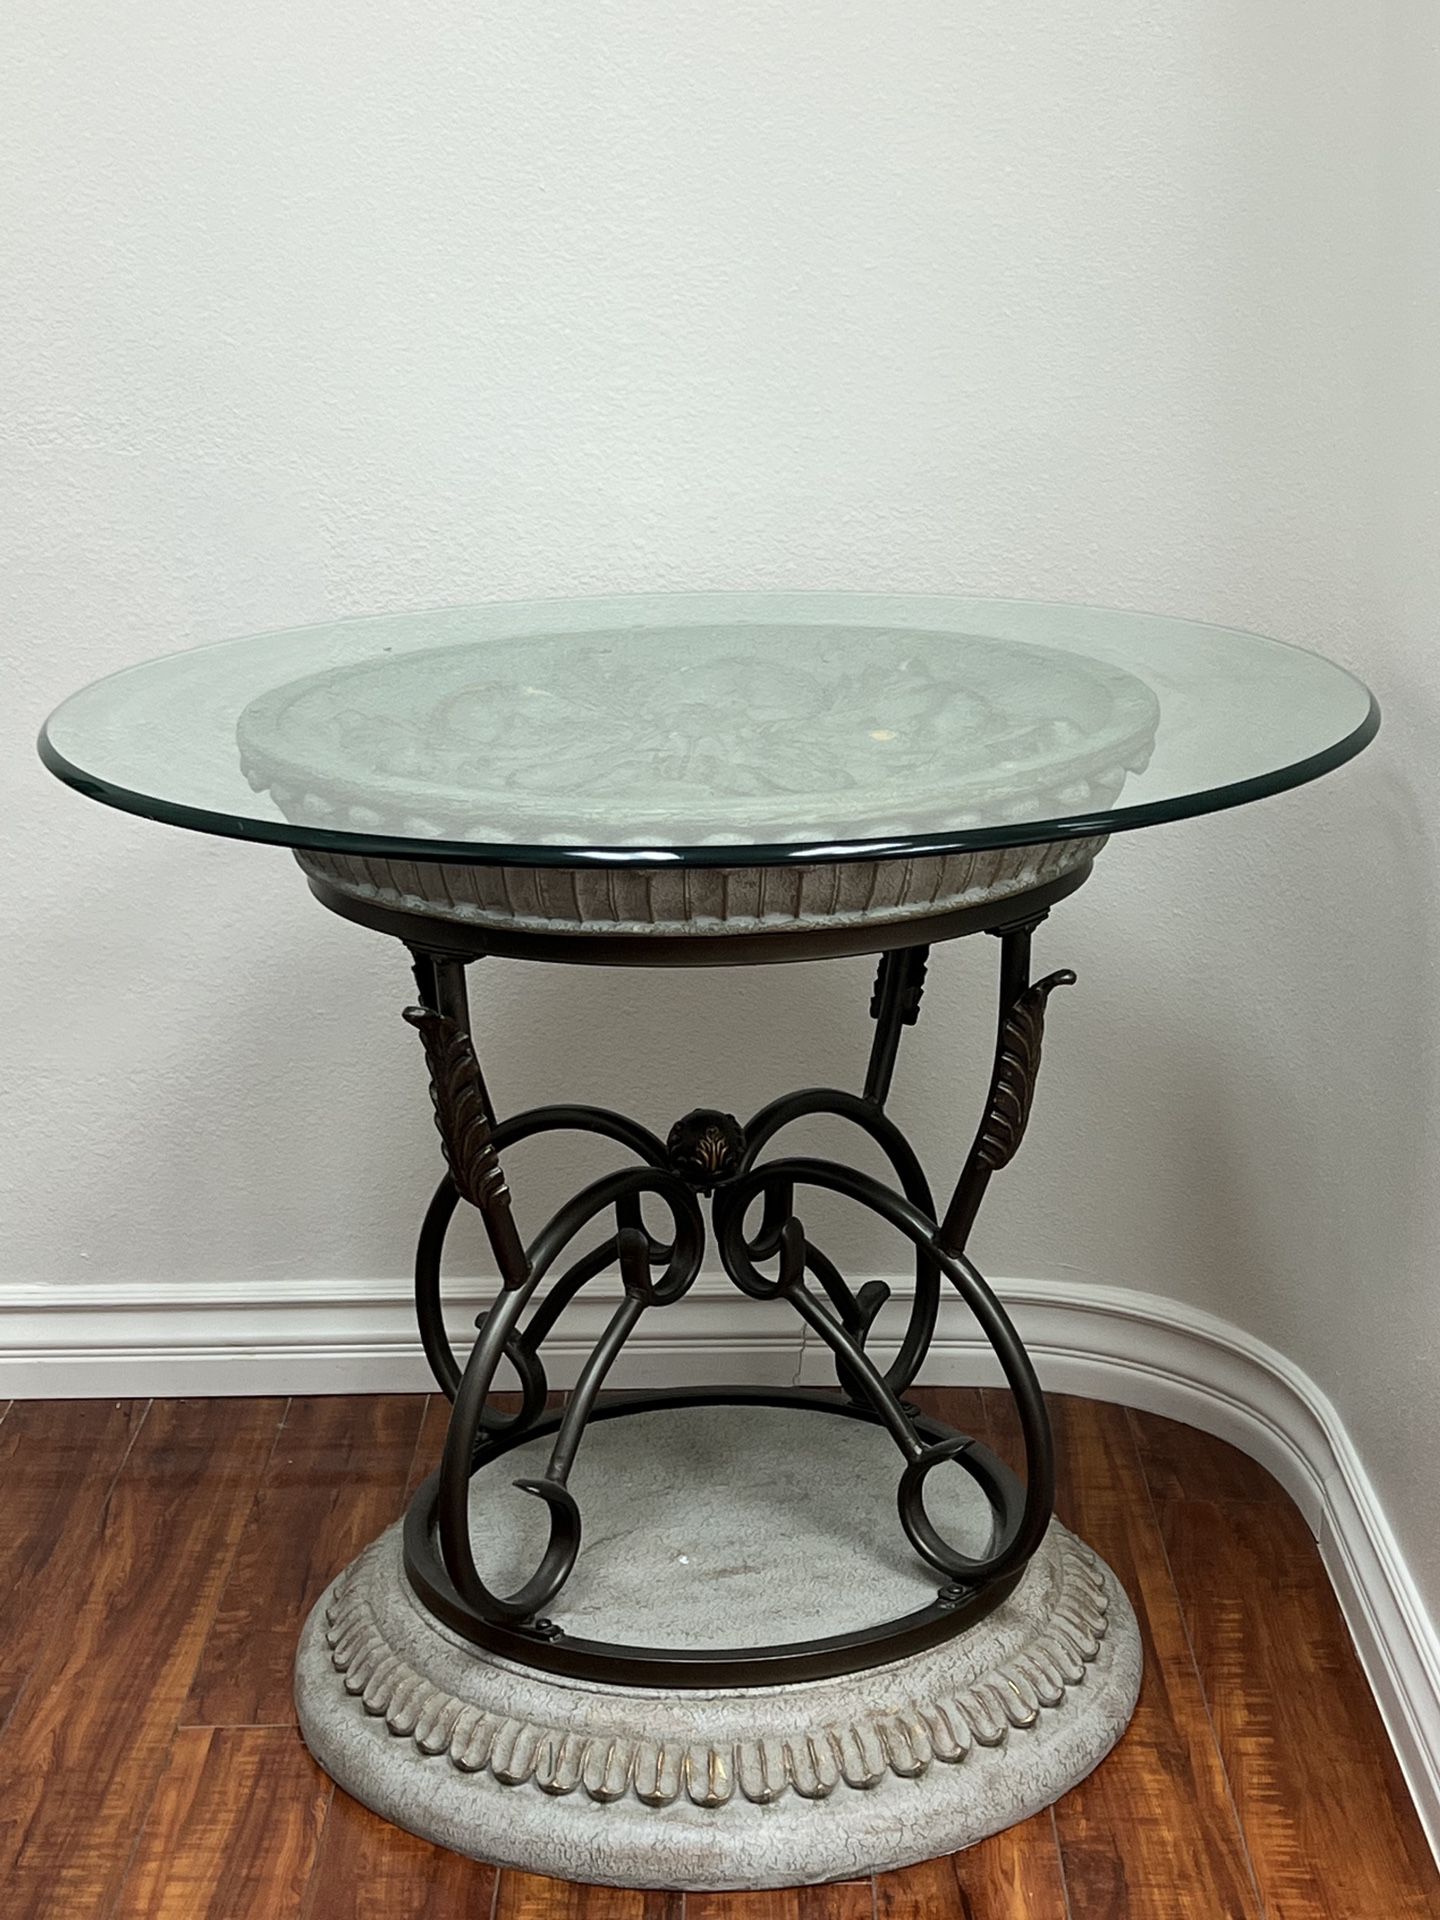 Gorgeous Glass Table, Heavy High Quality